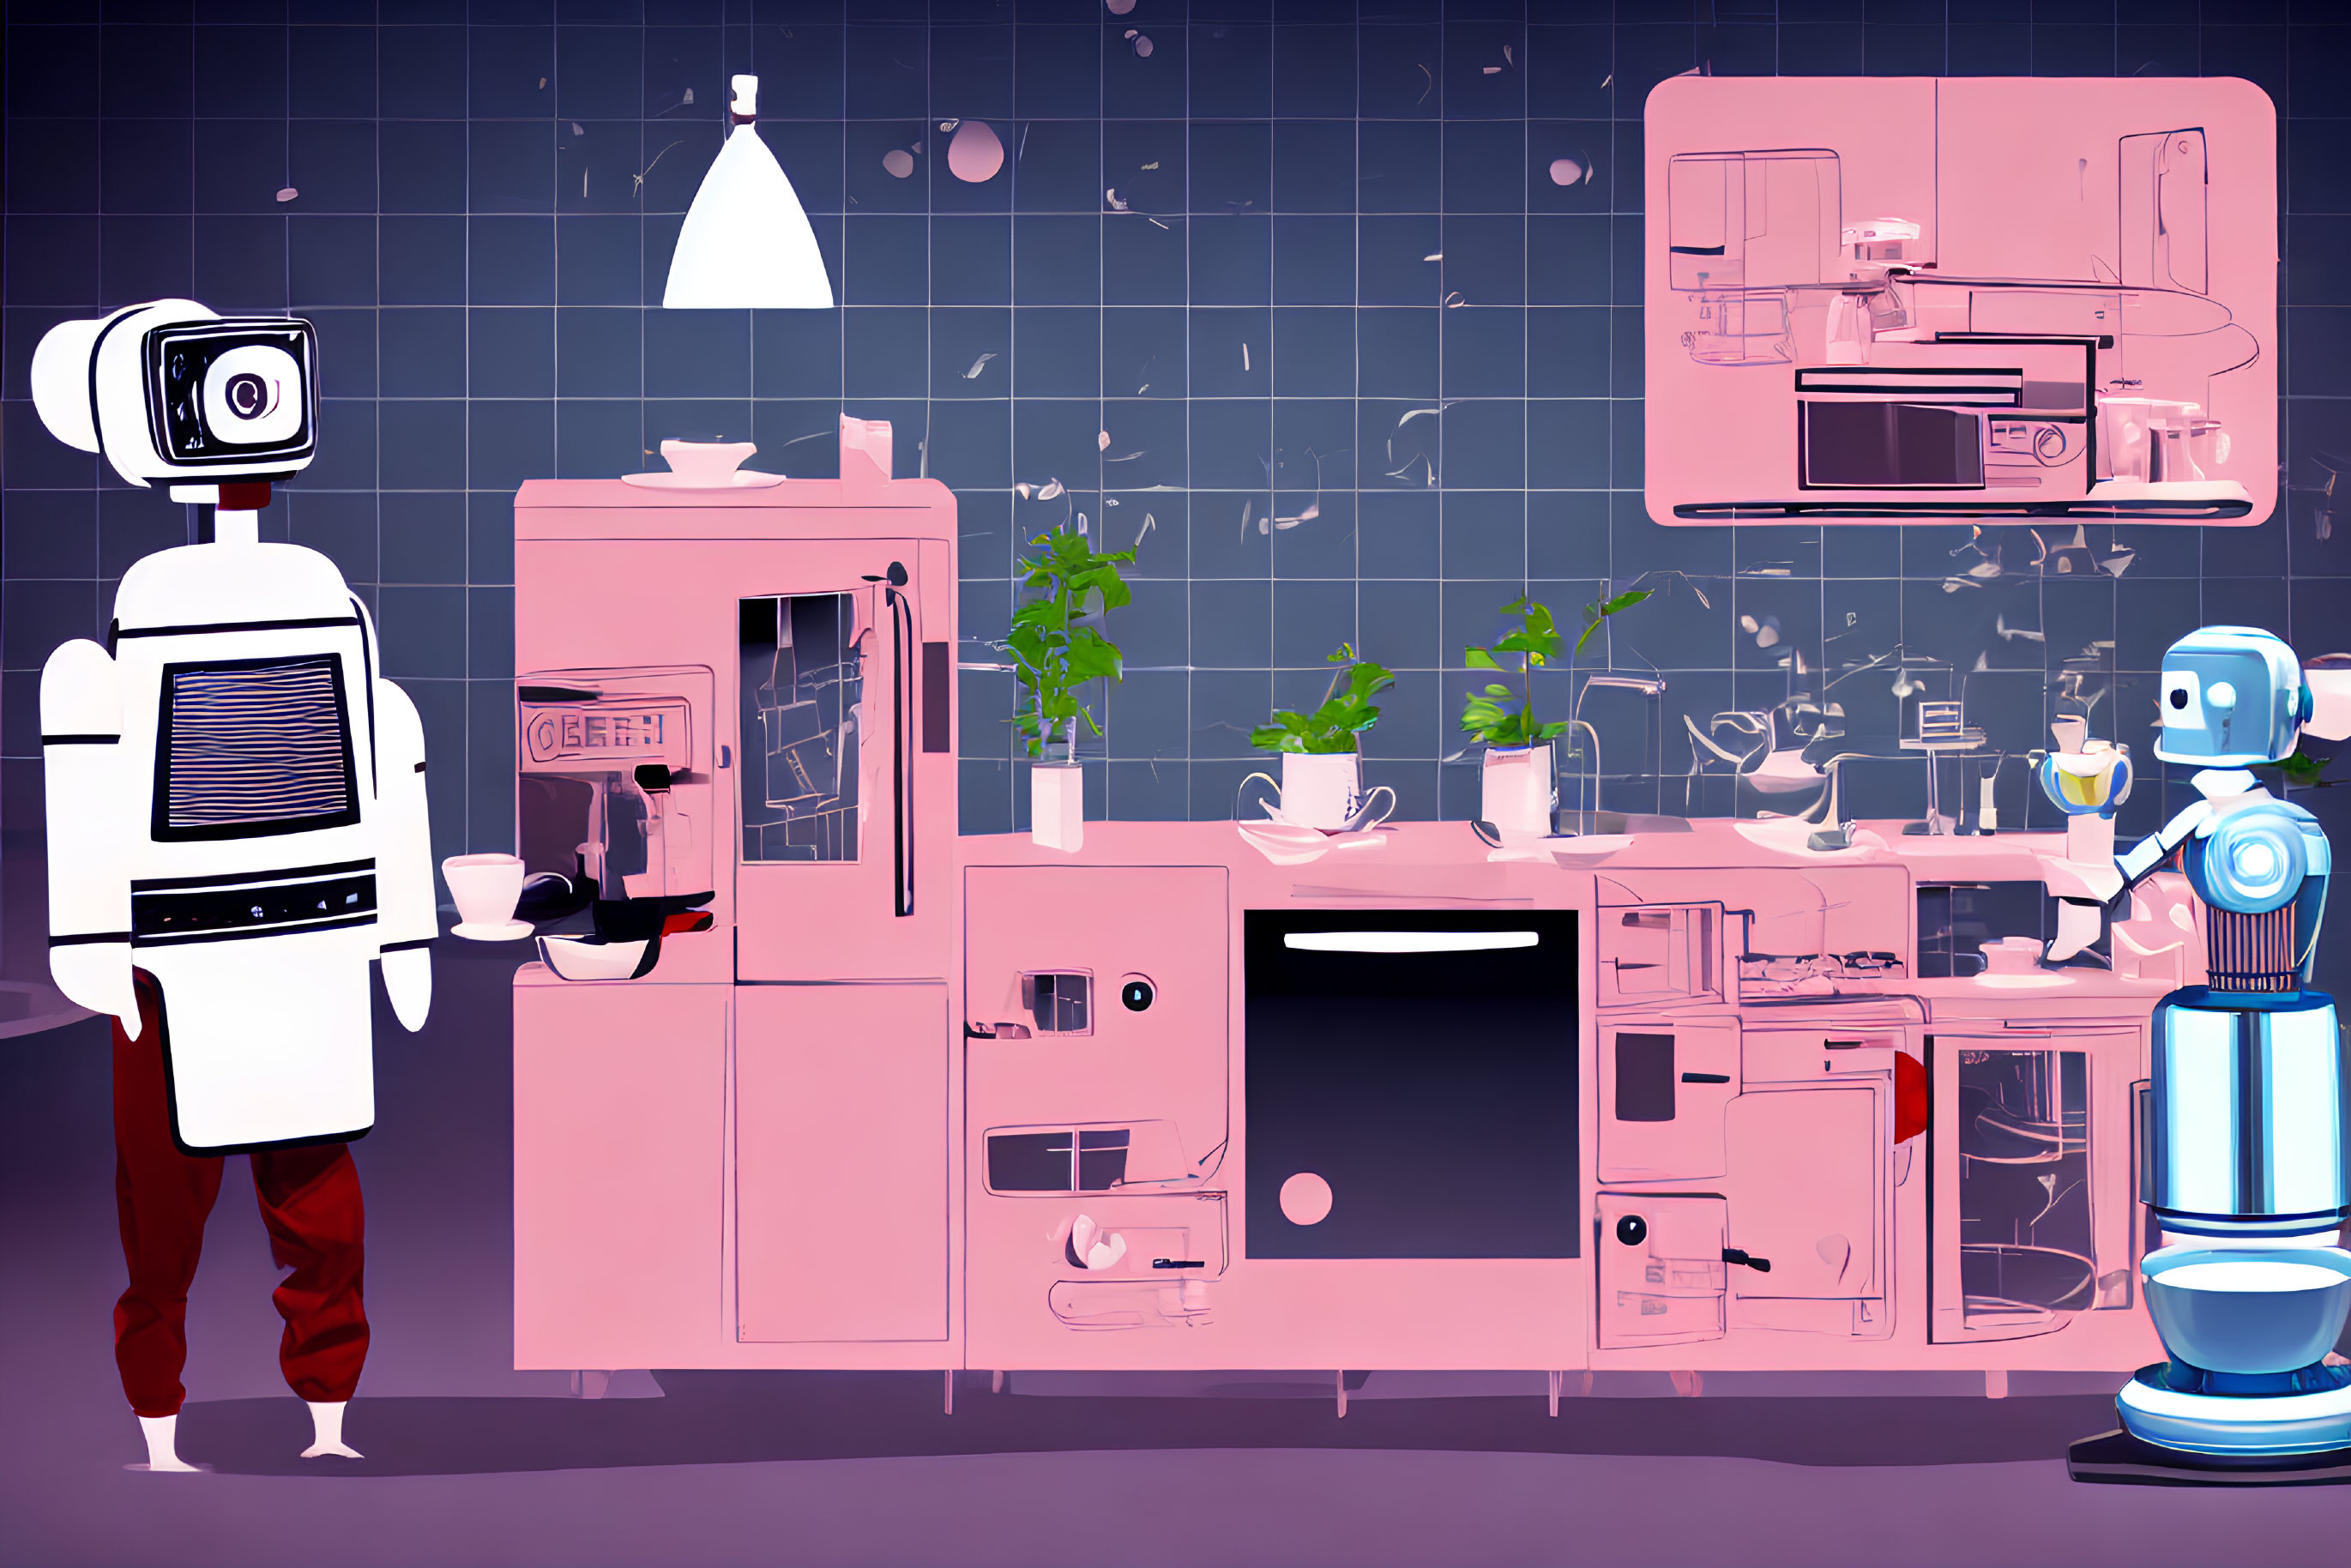 Stylized kitchen scene with robots cooking and brewing coffee among pink appliances and herbs on shelves against grid